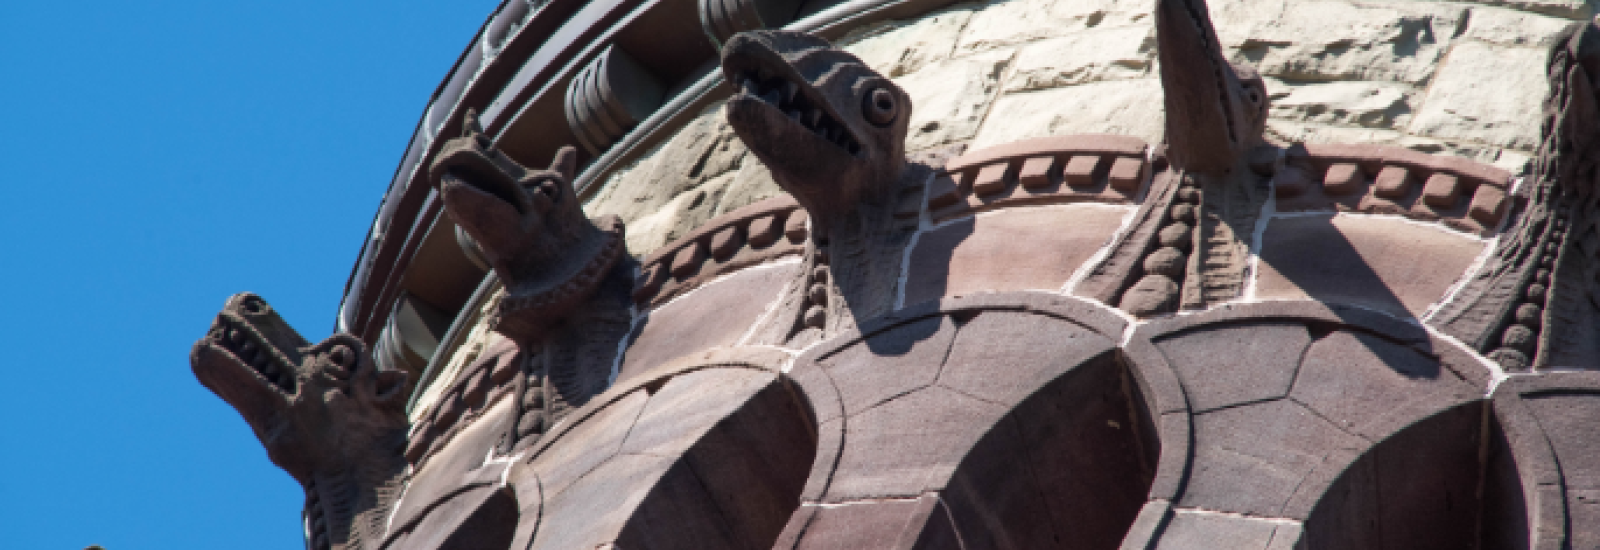 Grotesques on the Orton bell tower